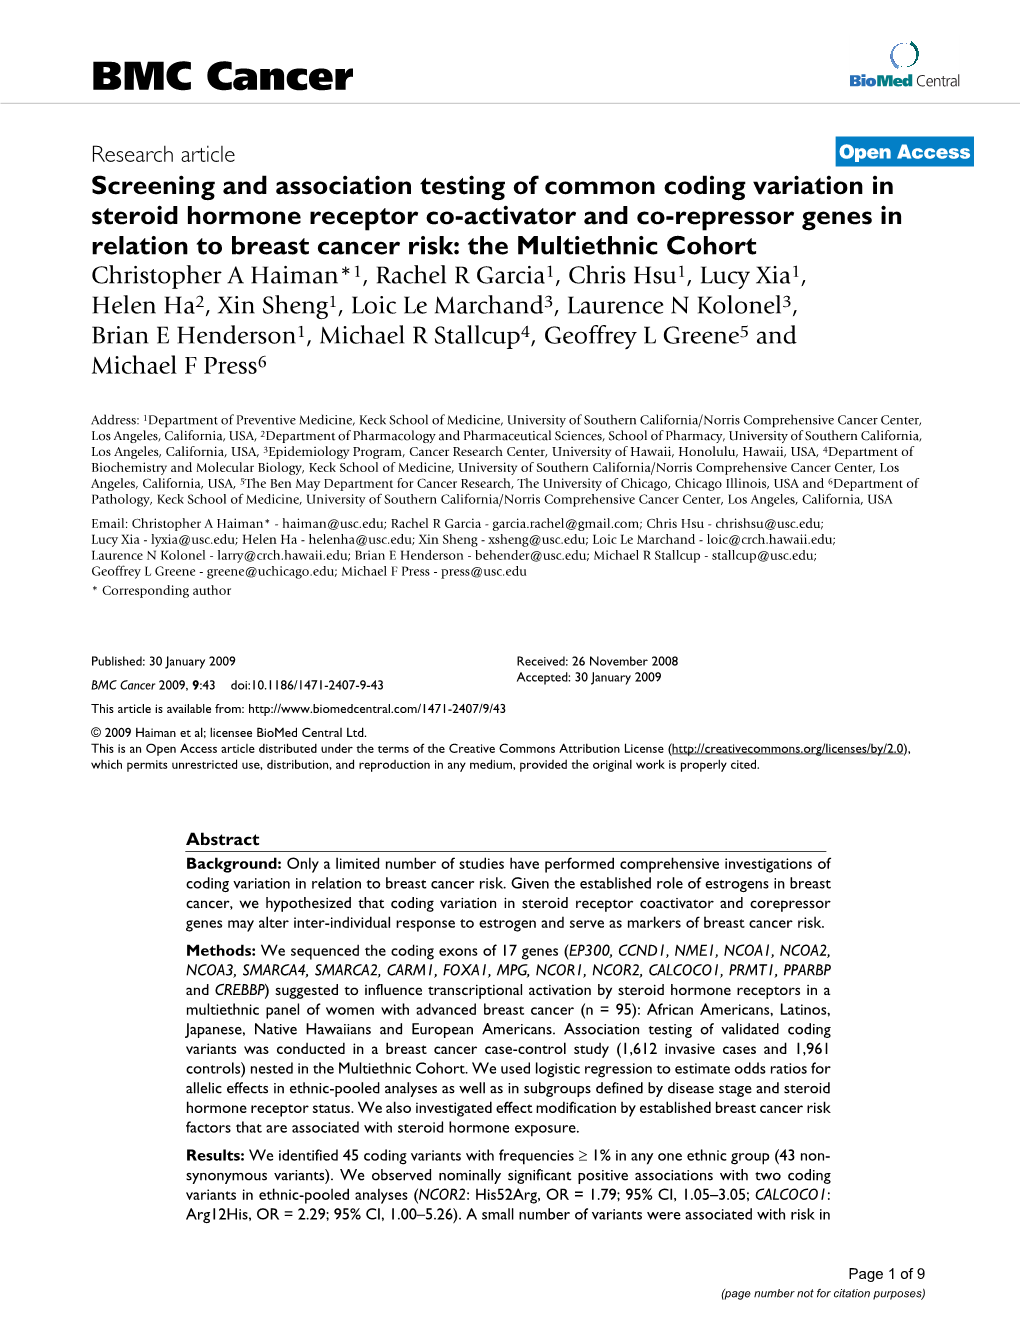 Screening and Association Testing of Common Coding Variation in Steroid